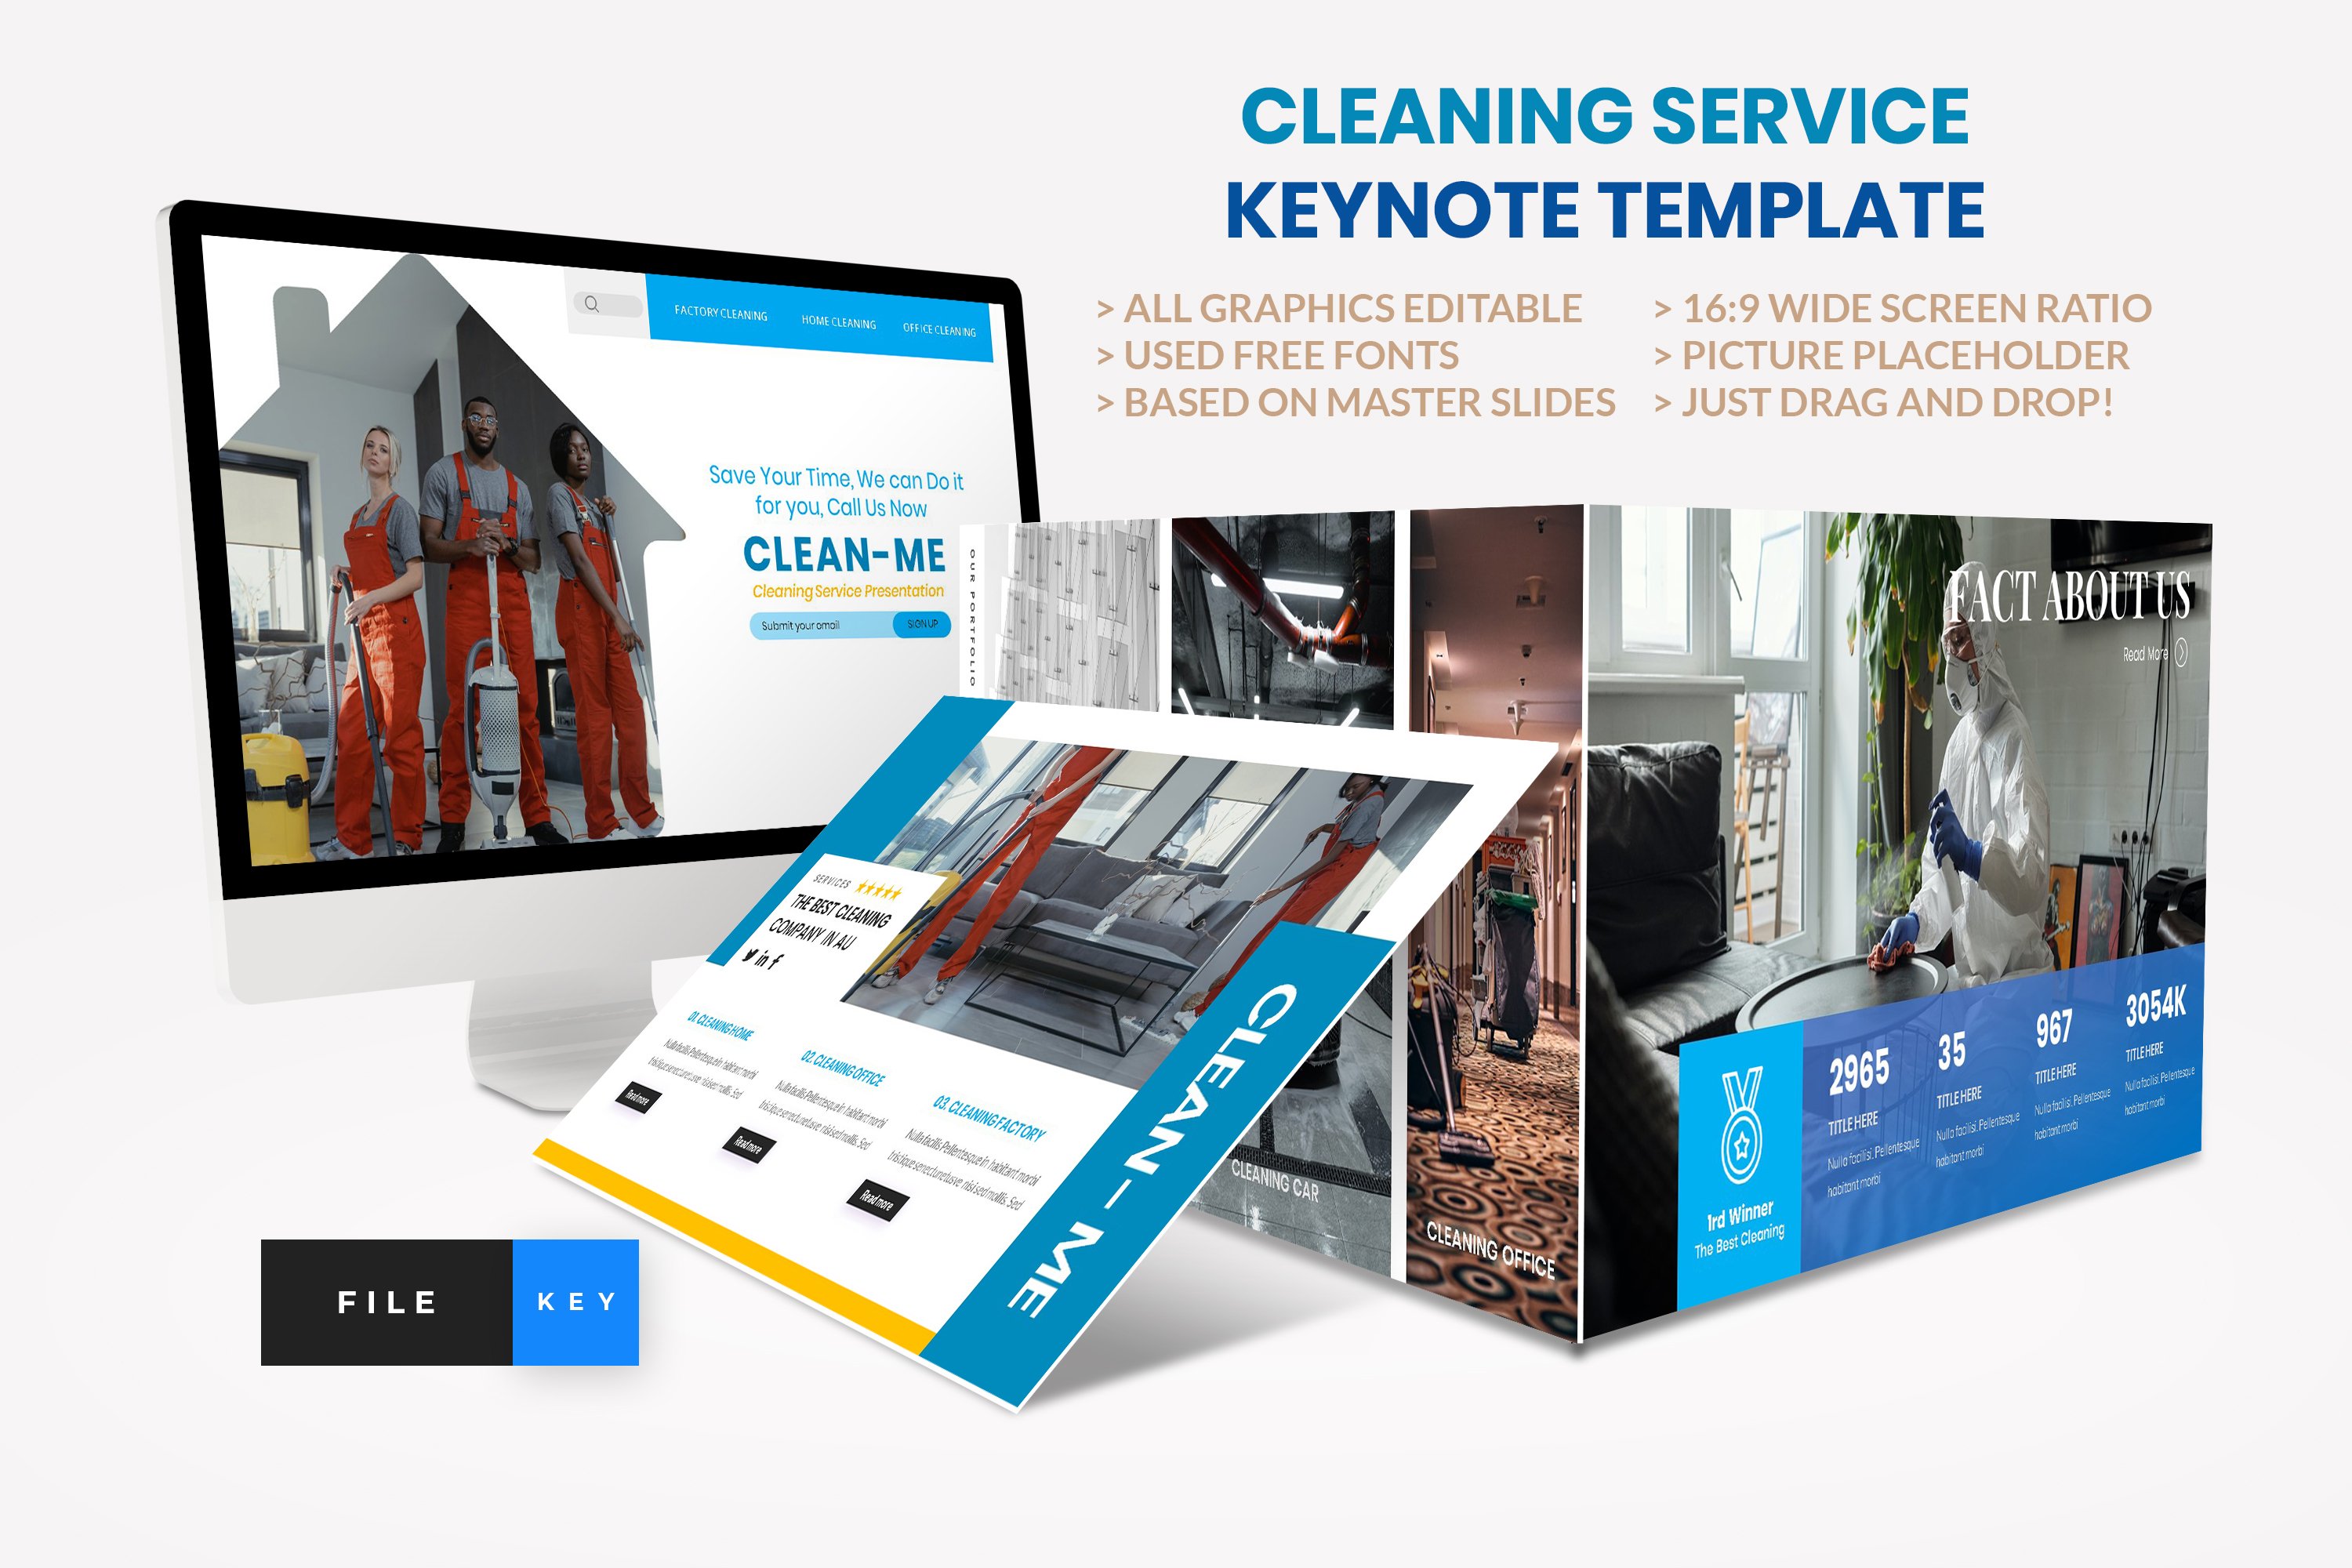 Cleaning Service Keynote Template cover image.